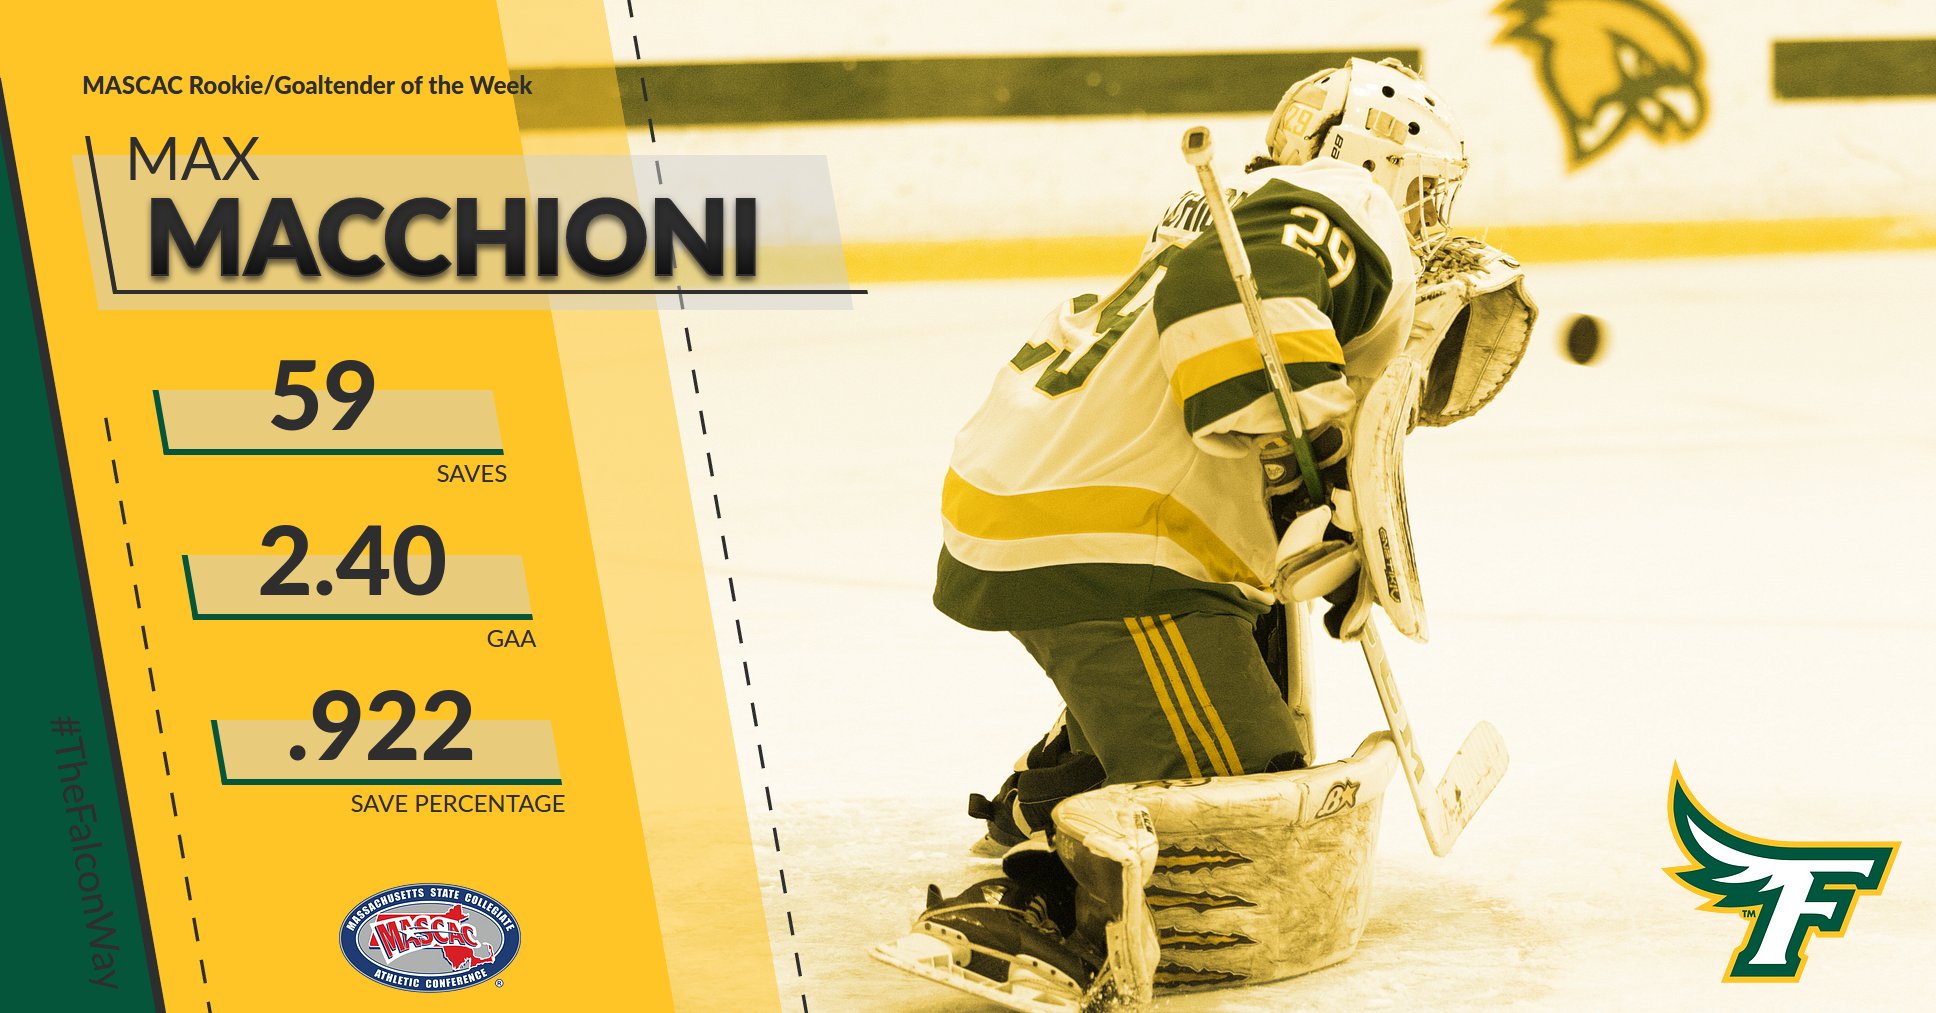 Macchioni Earns Both MASCAC Rookie And Goaltender Of The Week